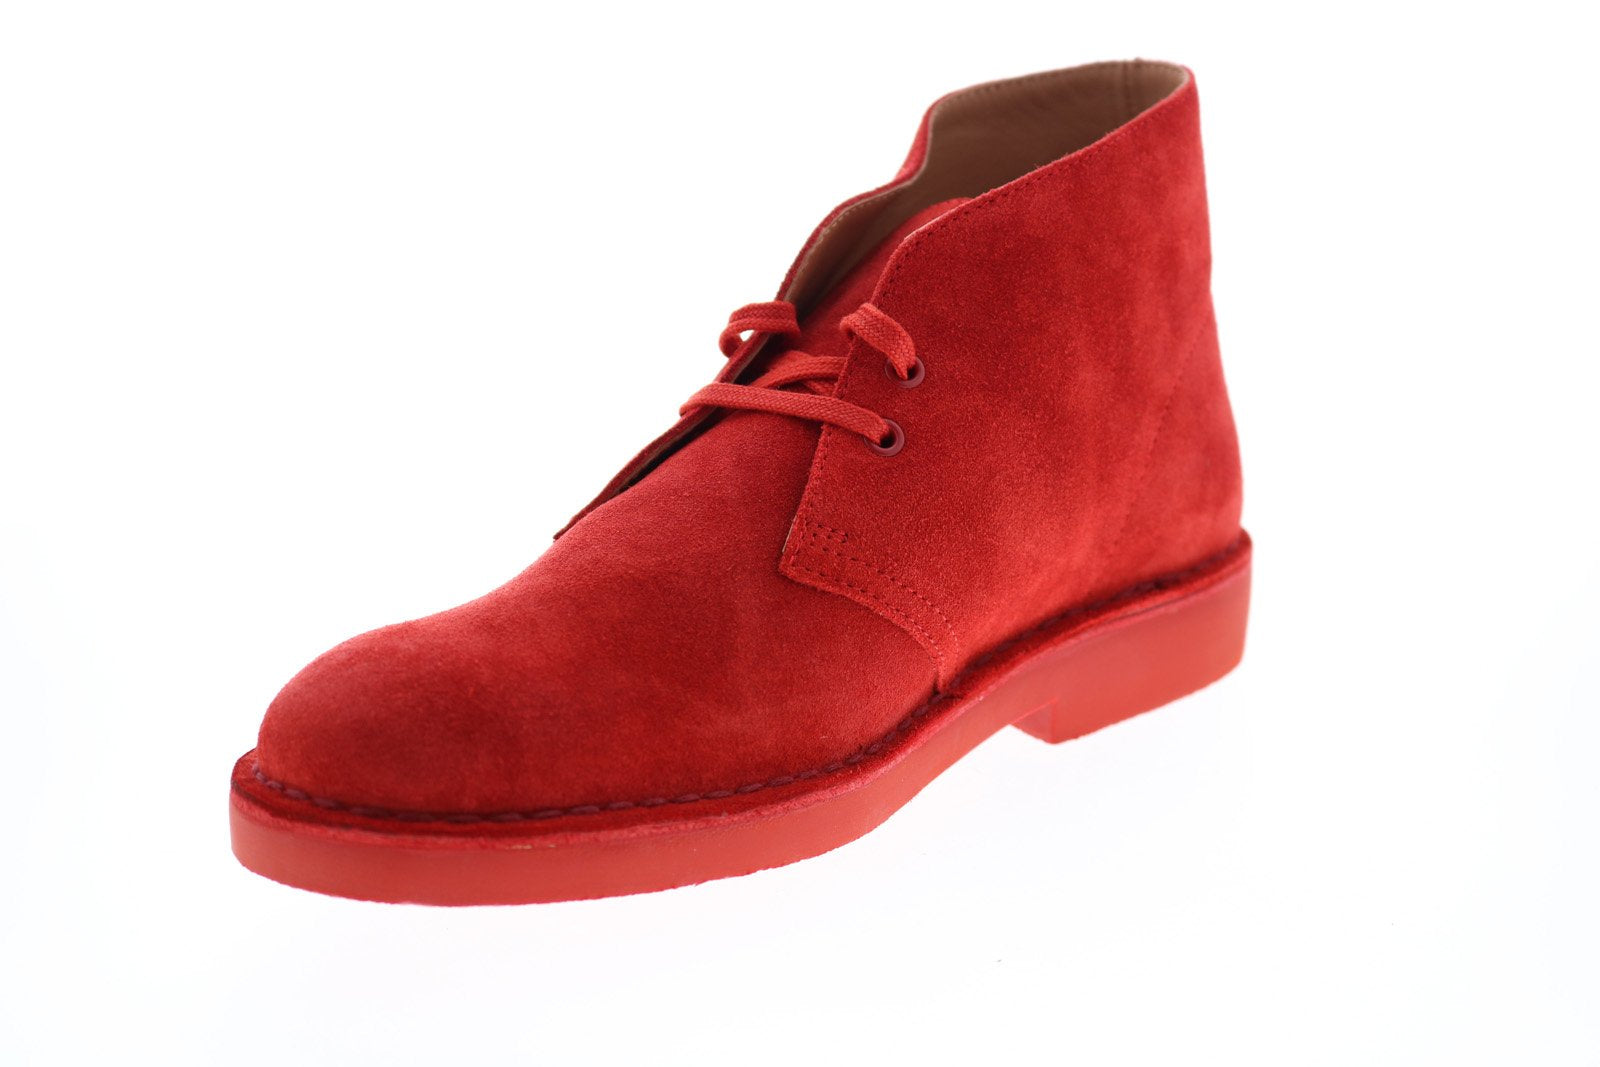 Clarks Boot 2 26155500 Mens Red Suede Lace Up Desert Boots - Shoes